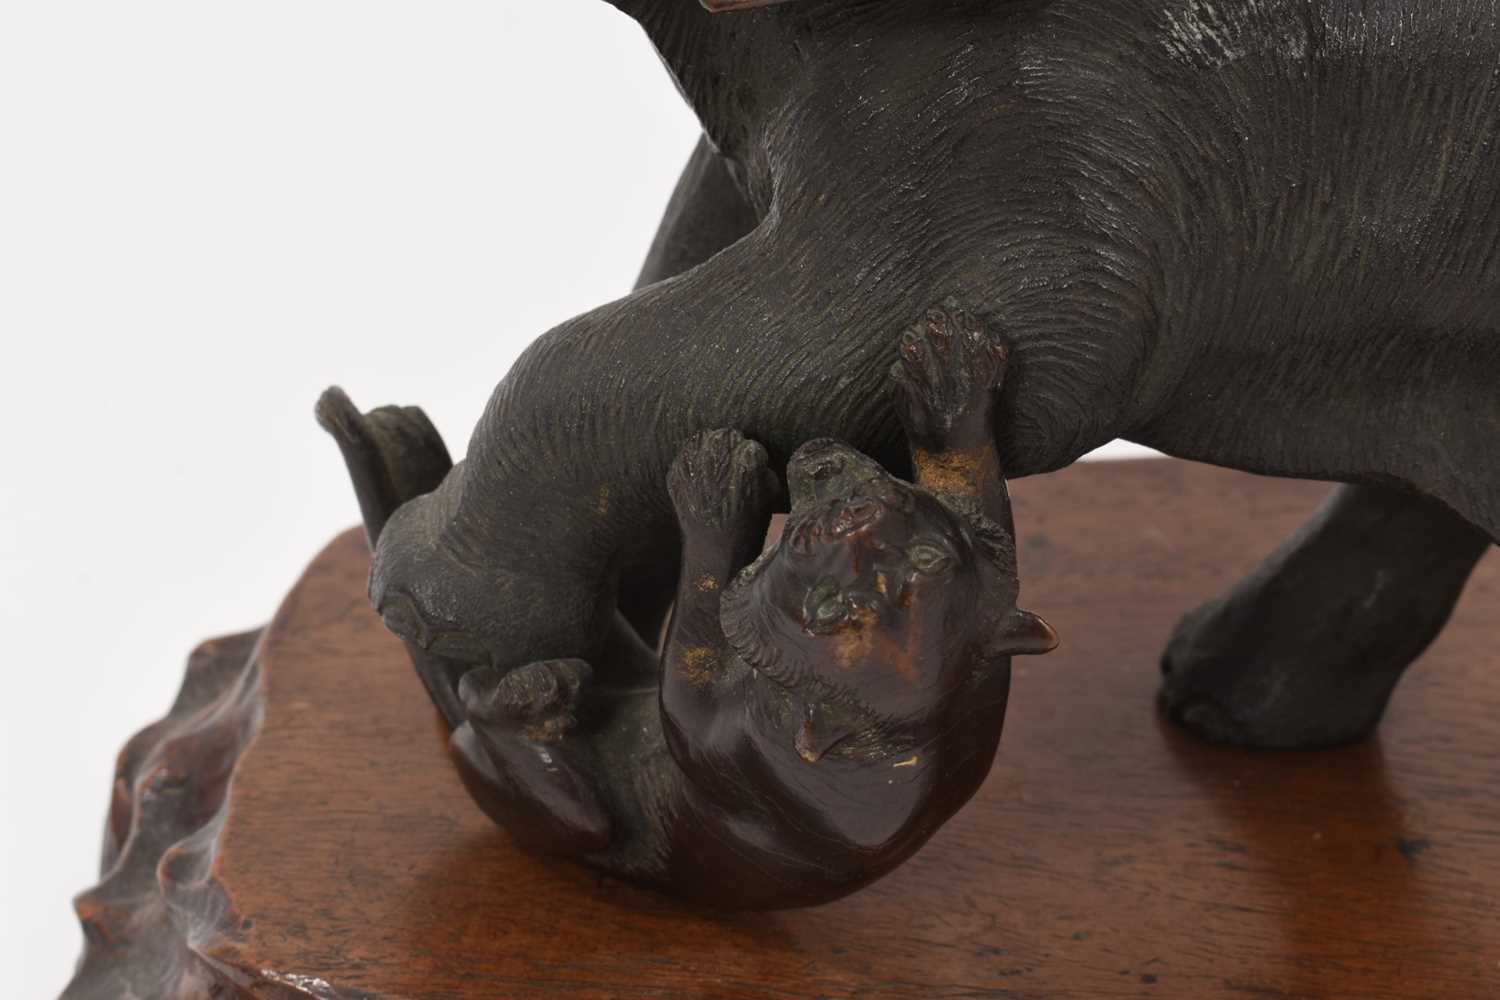 Late 19th century/early 20th century Japanese bronze sculpture of an elephant - Image 3 of 5